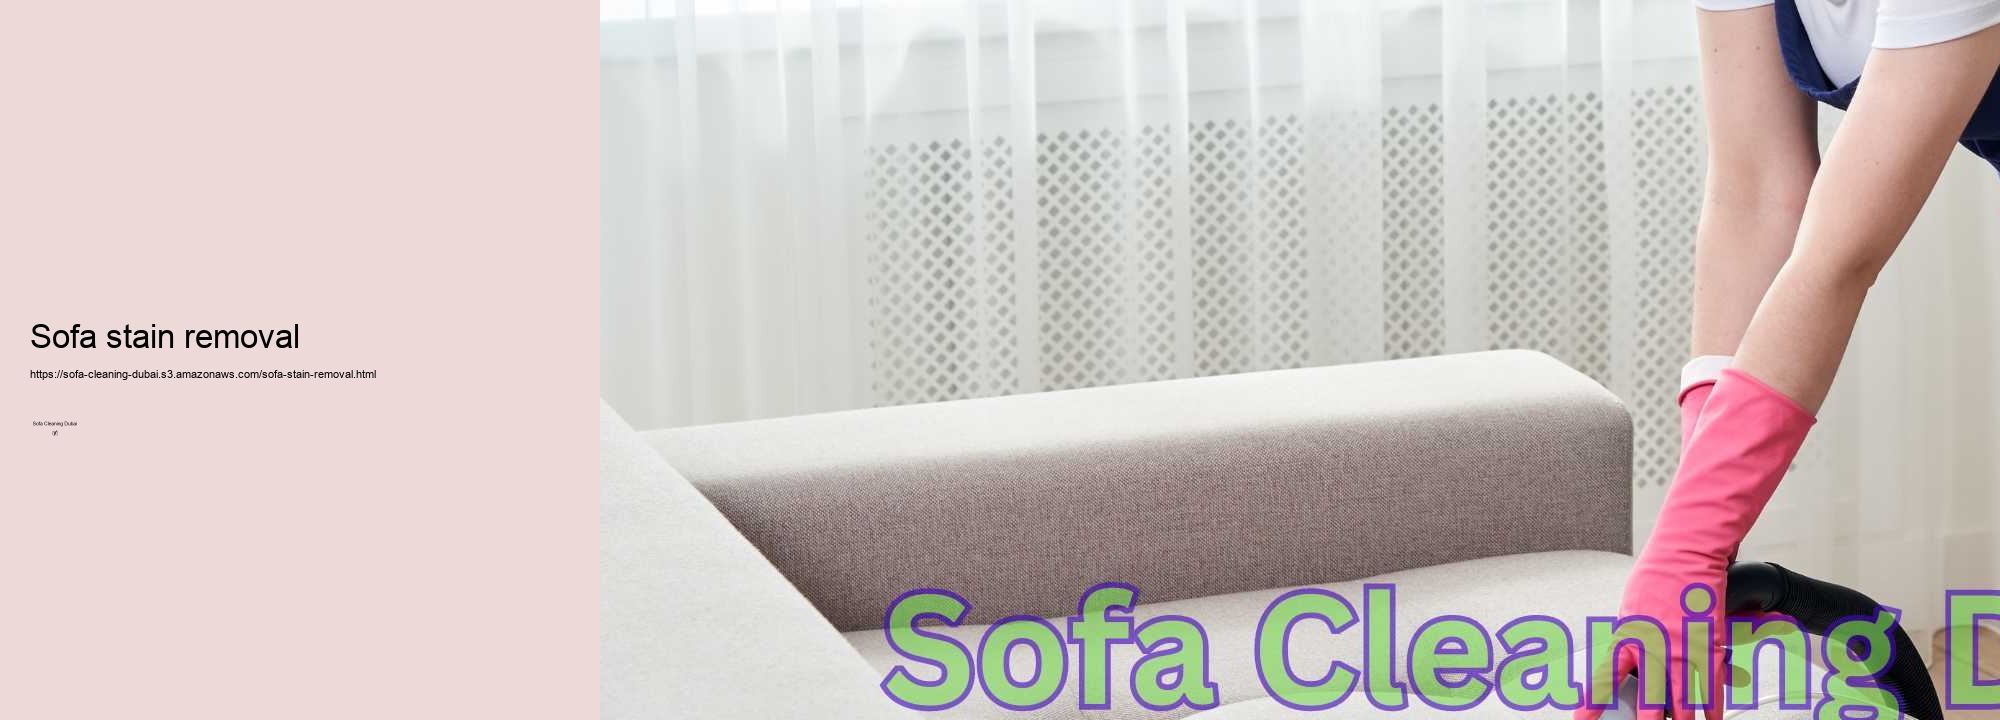 Sofa stain removal